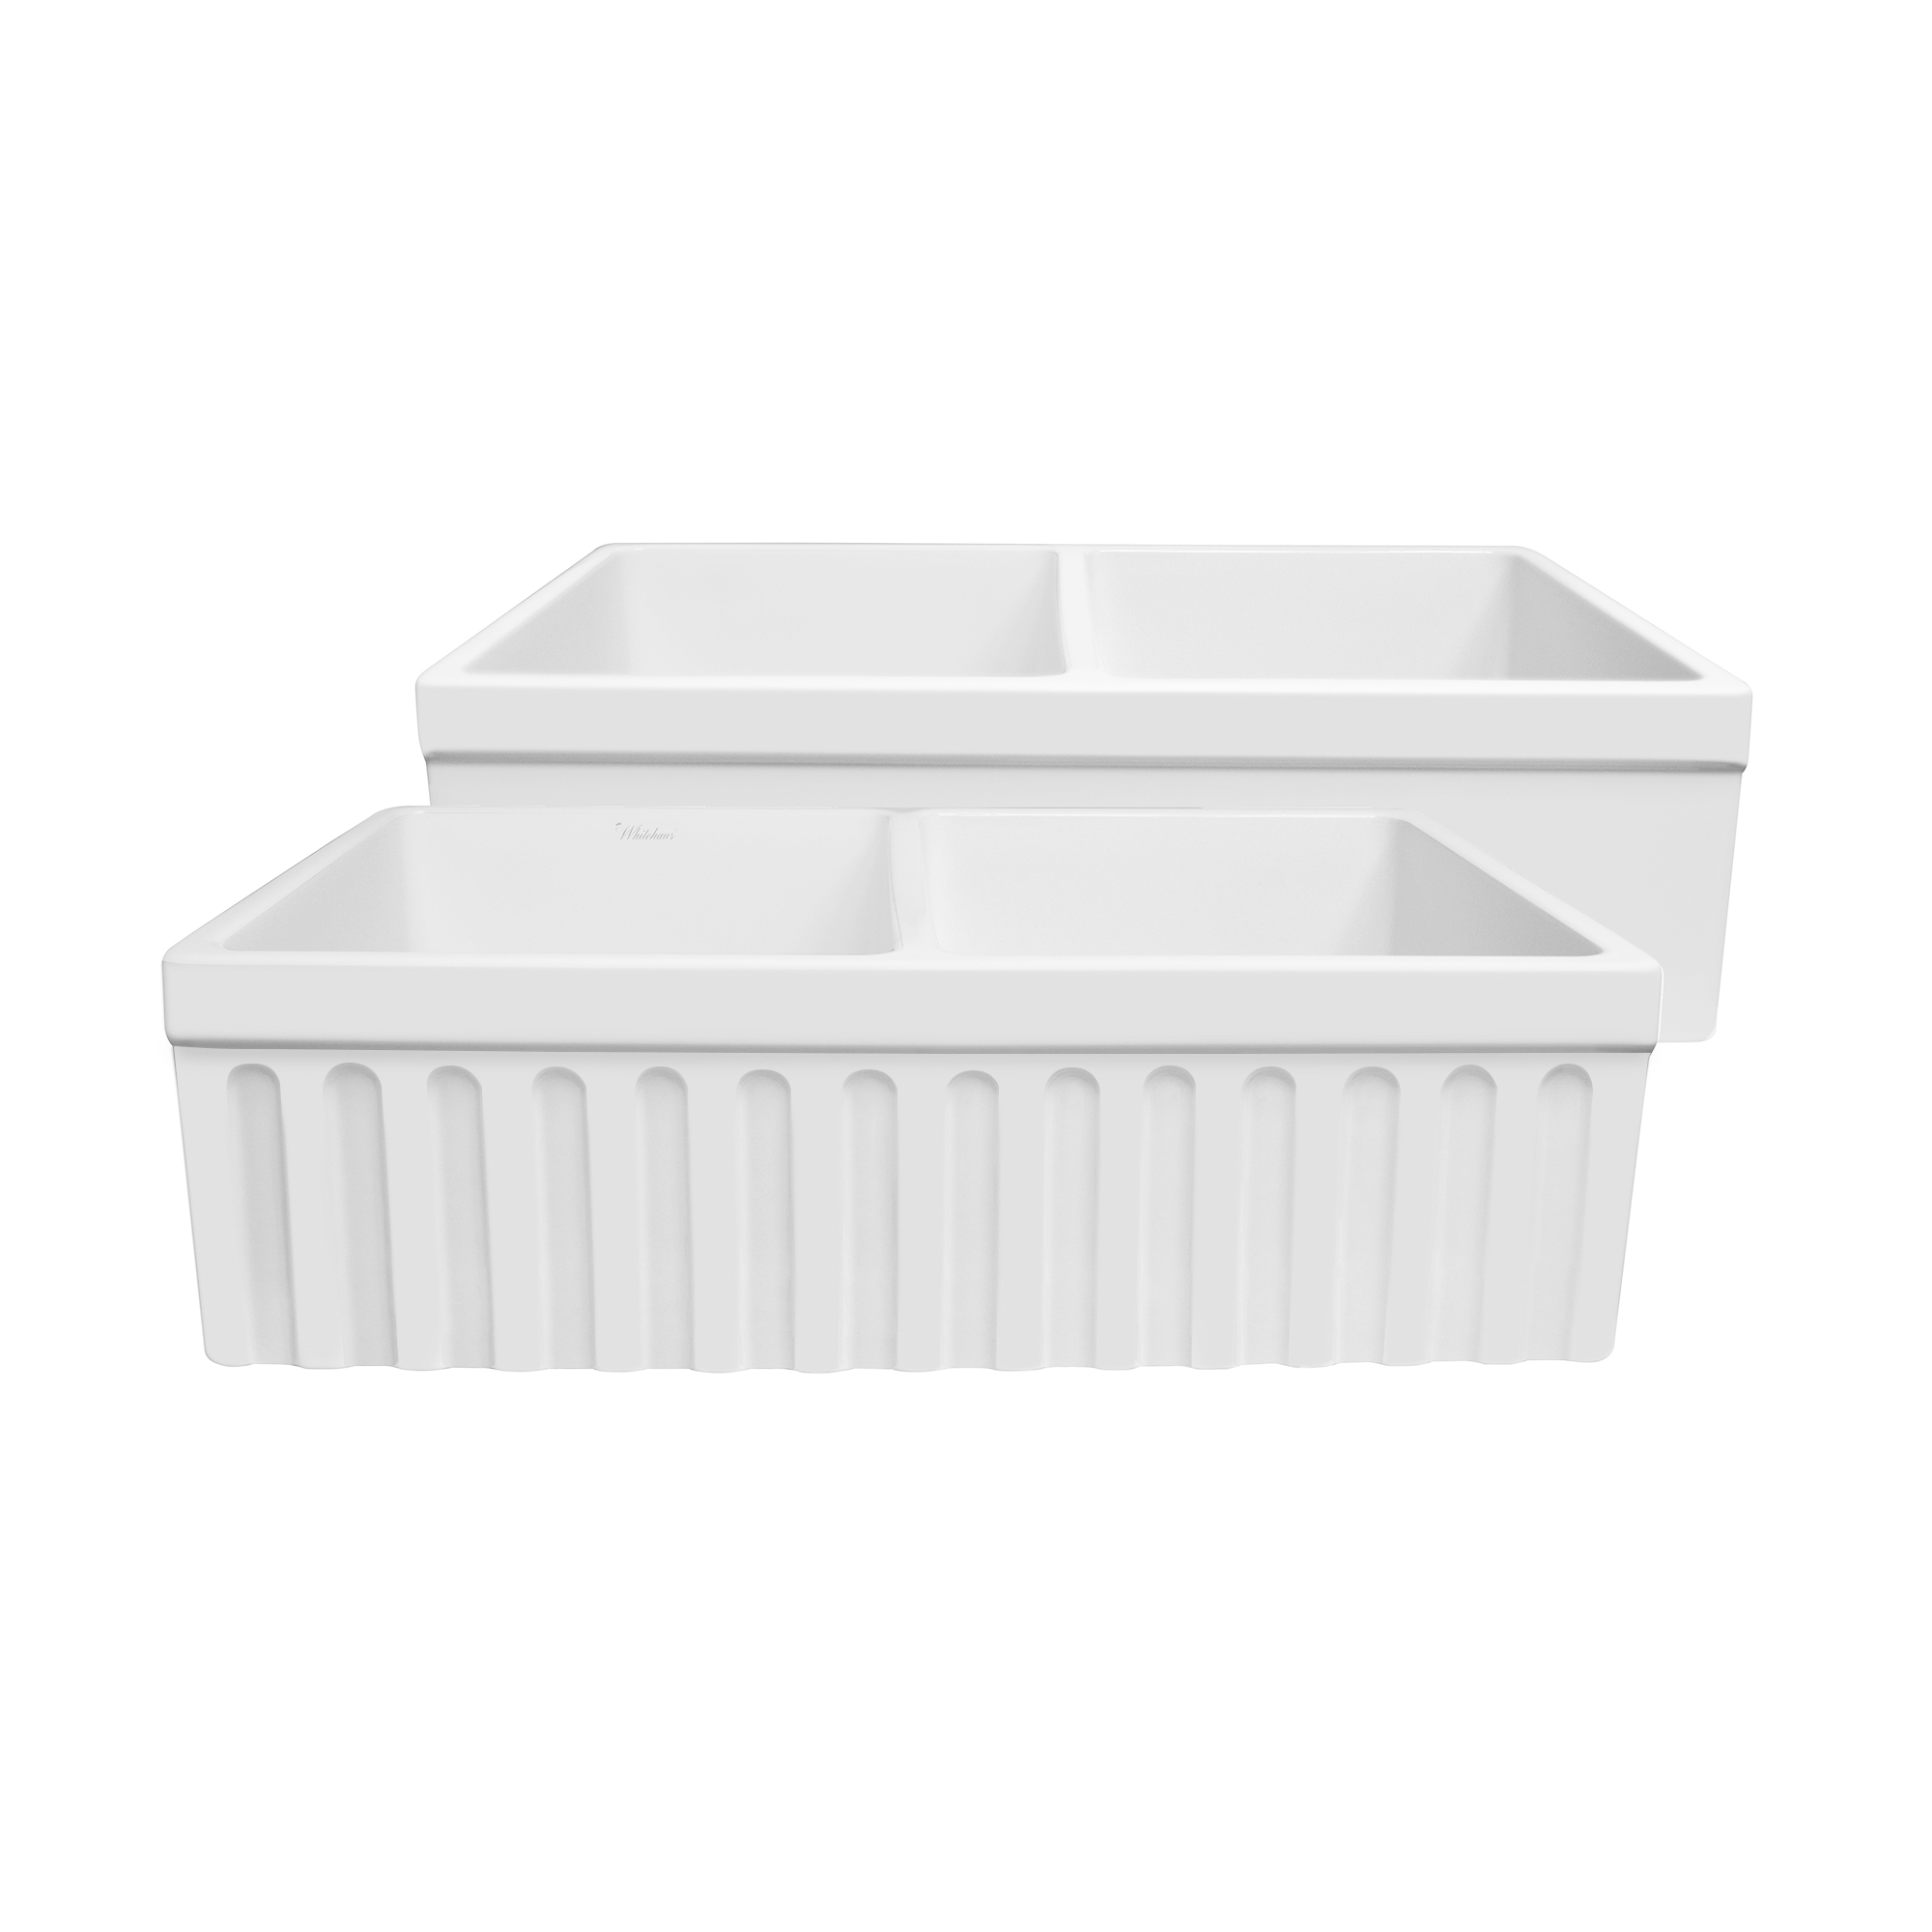 Farmhaus Quatro Alcove Reversible Matte Double Bowl  Fireclay Kitchen Sink with Fluted  2" Lip Front Apron on one Side and a 2 +